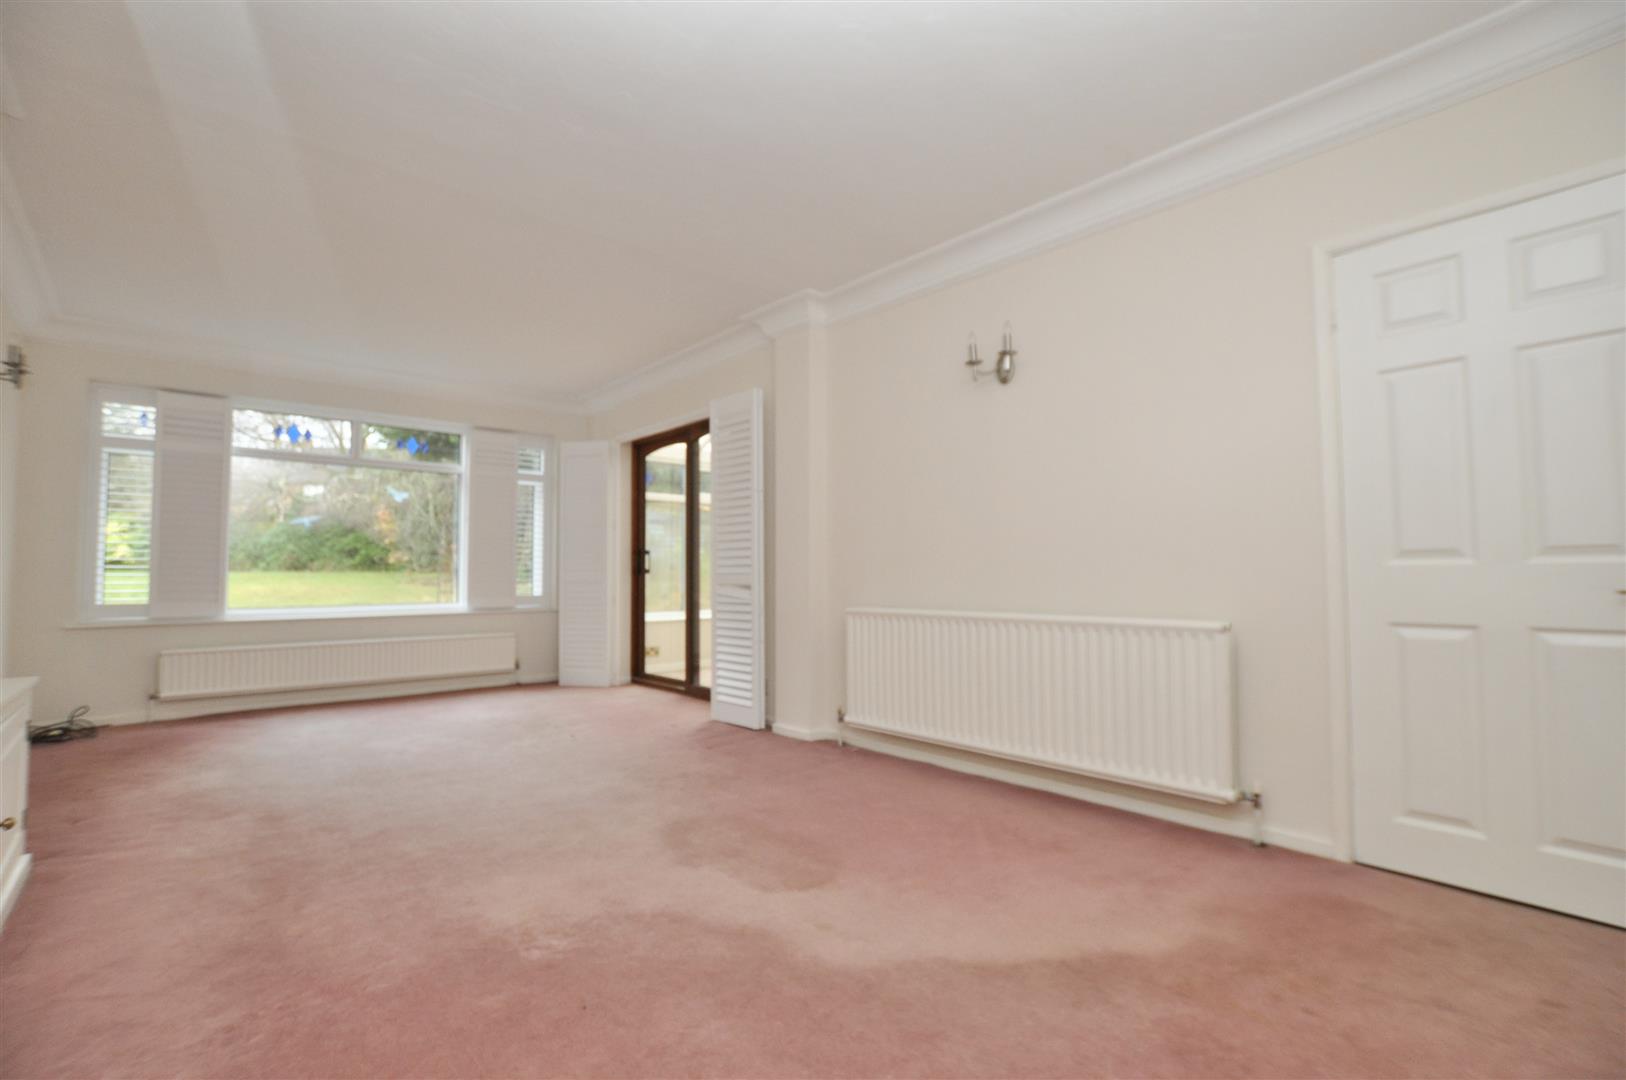 3 bed house for sale in Lodge Crescent, Stourbridge  - Property Image 7